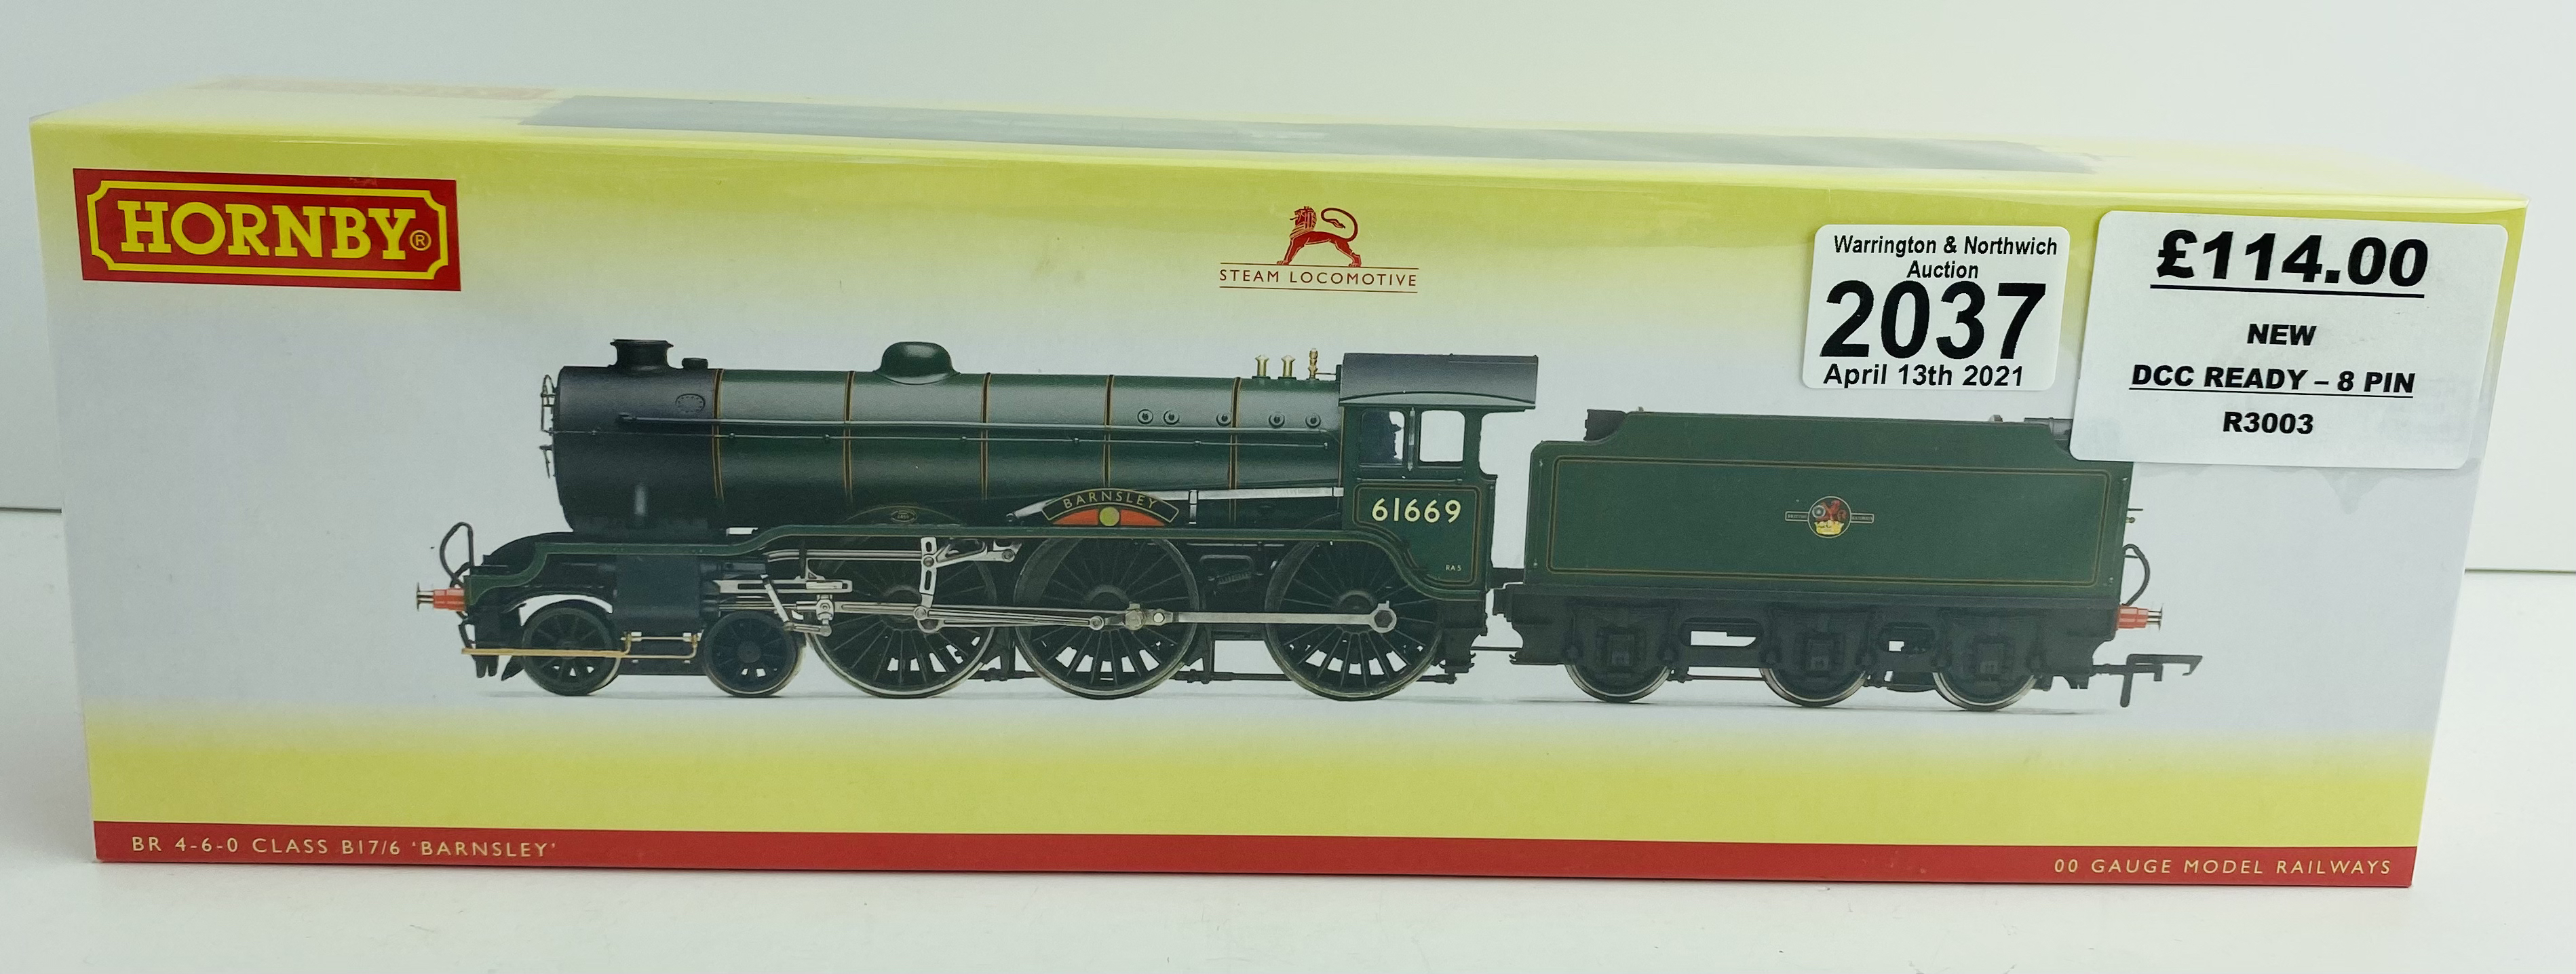 Hornby B17 Barnsley Loco with Detail Pack, Instructions, Boxed - NEW EX SHOP STOCK P&P Group 1 (£